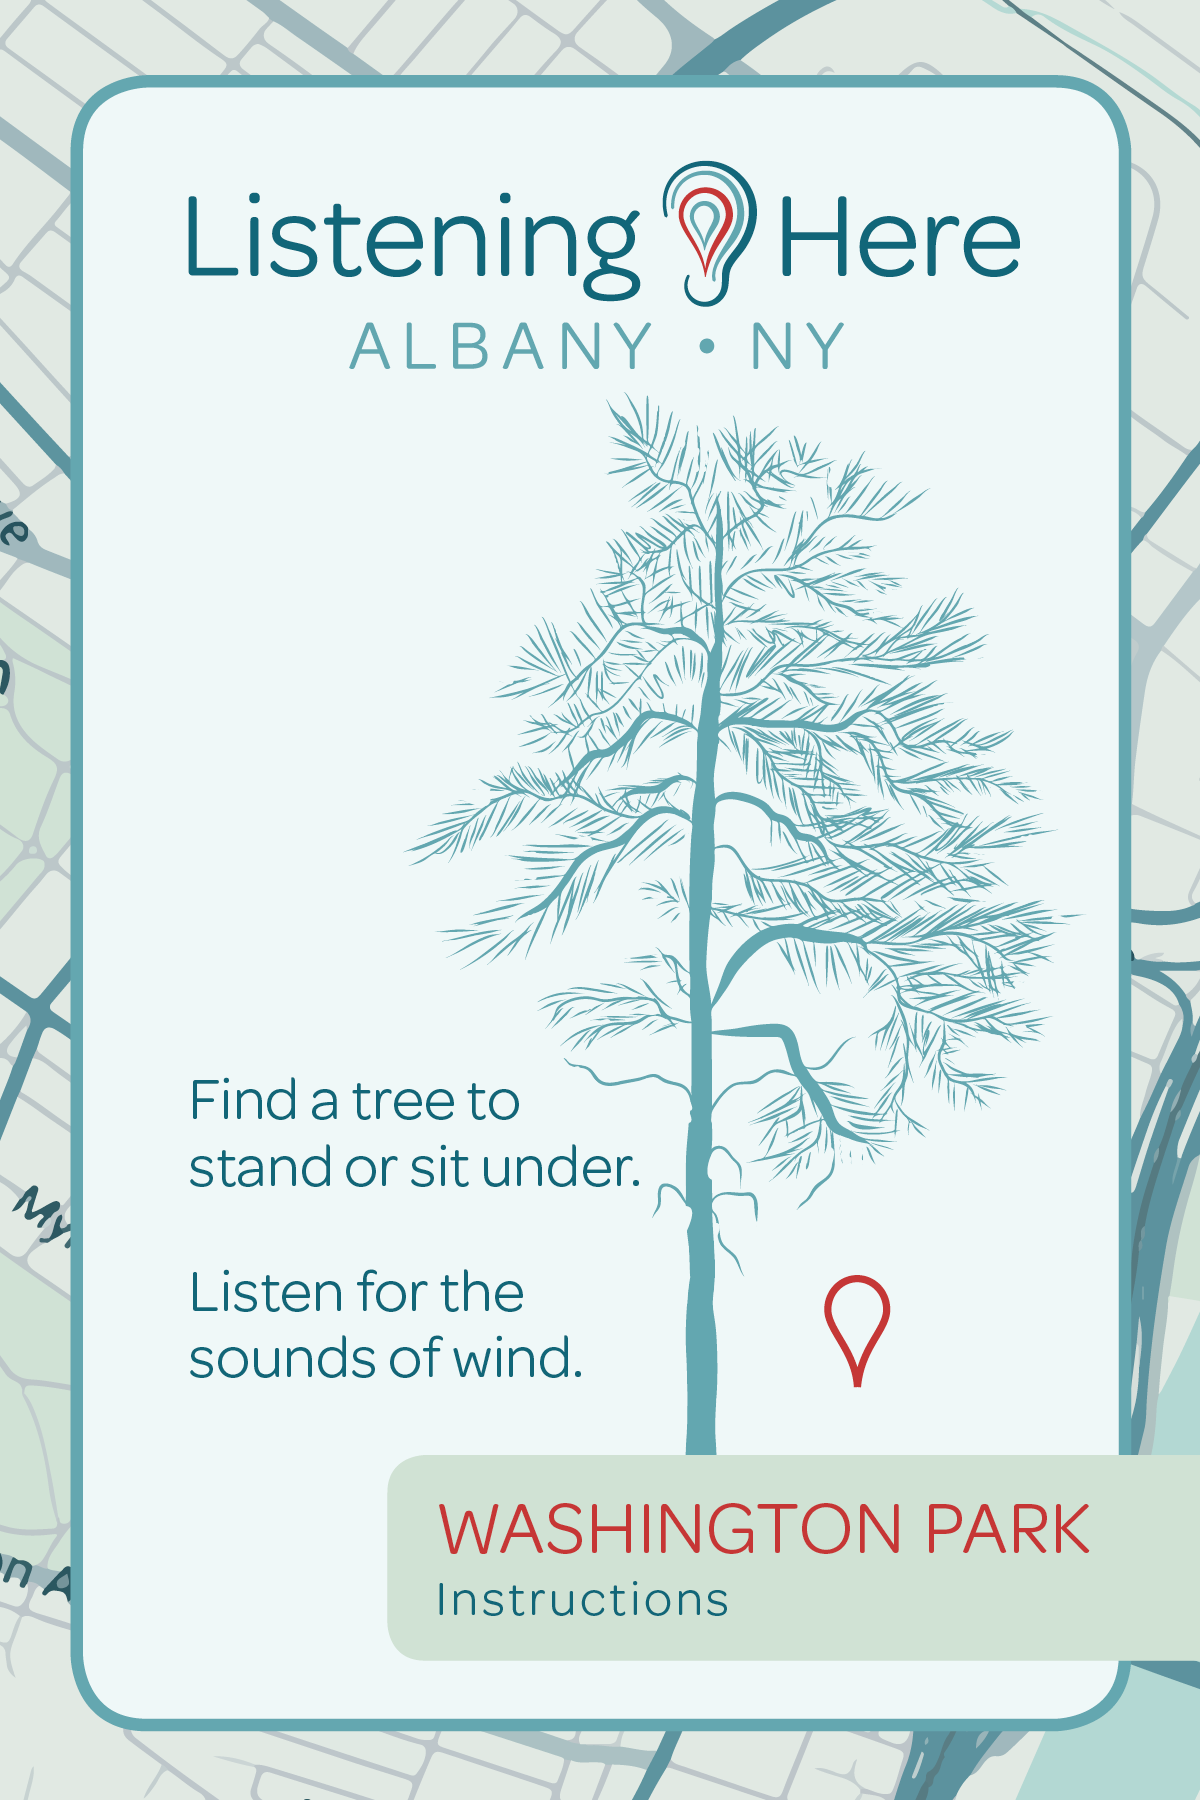 Listening HERE: Albany NY.    Washington Park: Instructions.    Find a tree to stand or sit under.    Listen for the sounds of wind.